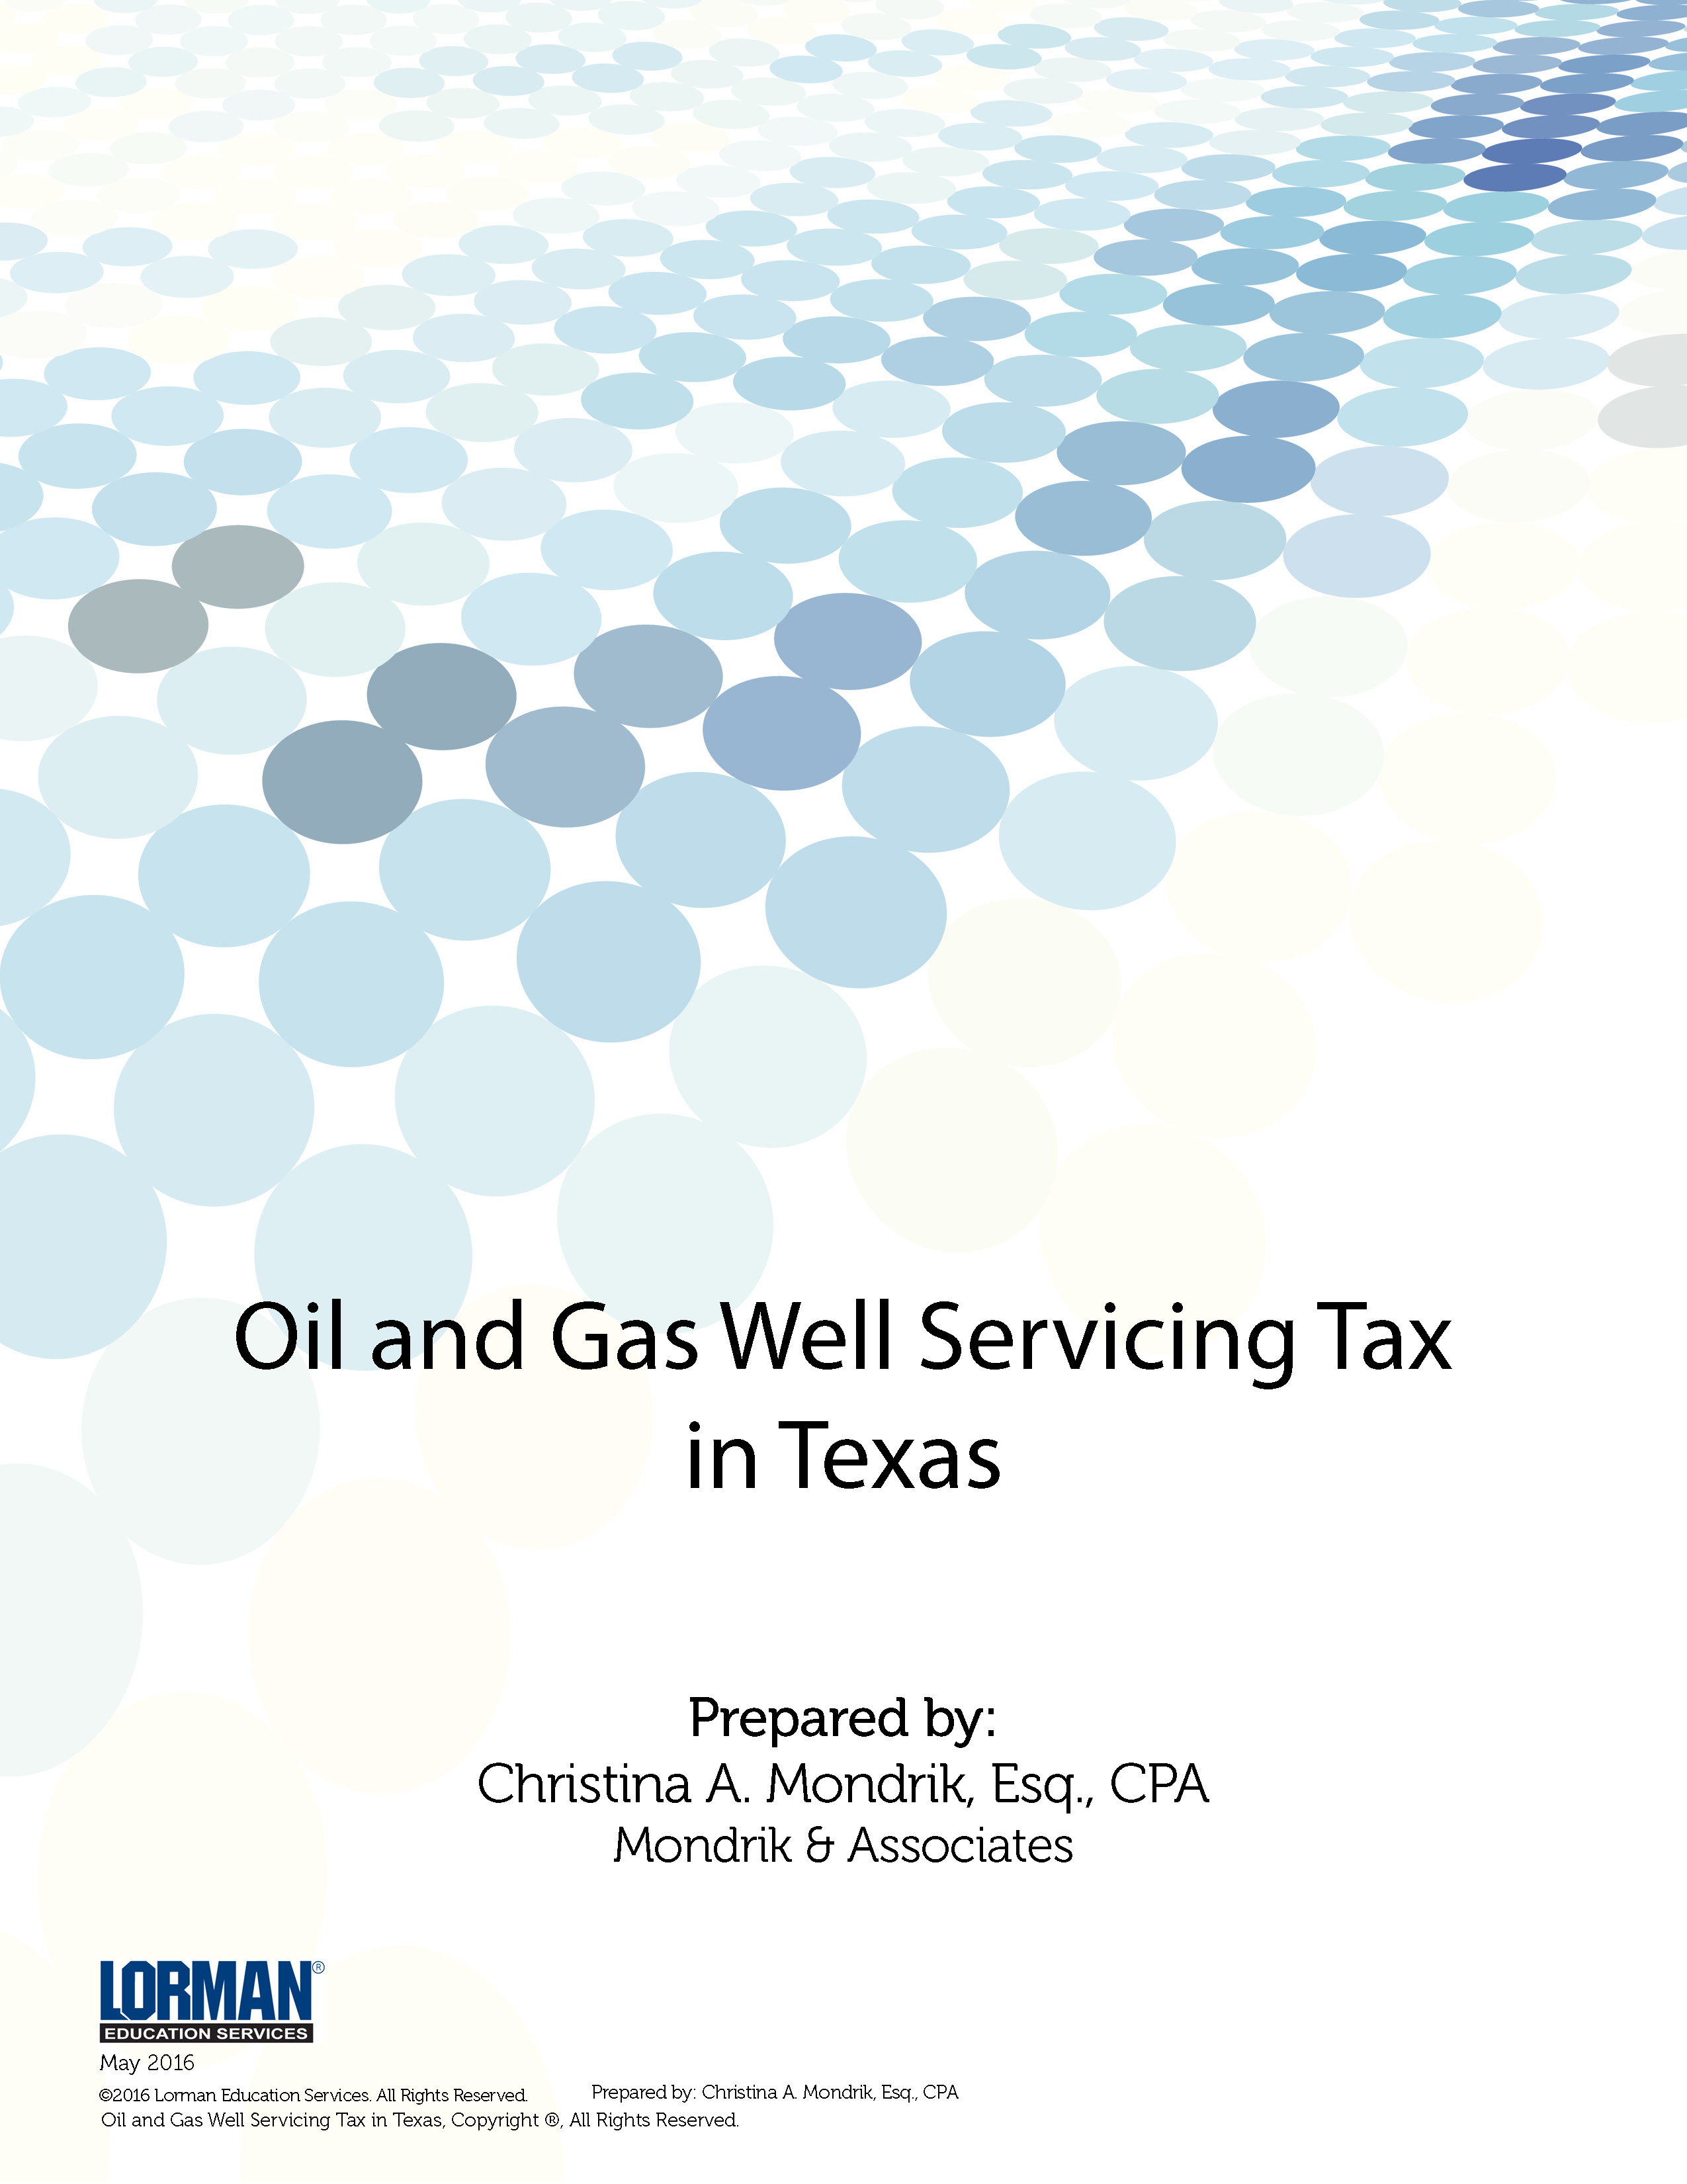 Oil and Gas Well Servicing Tax in Texas